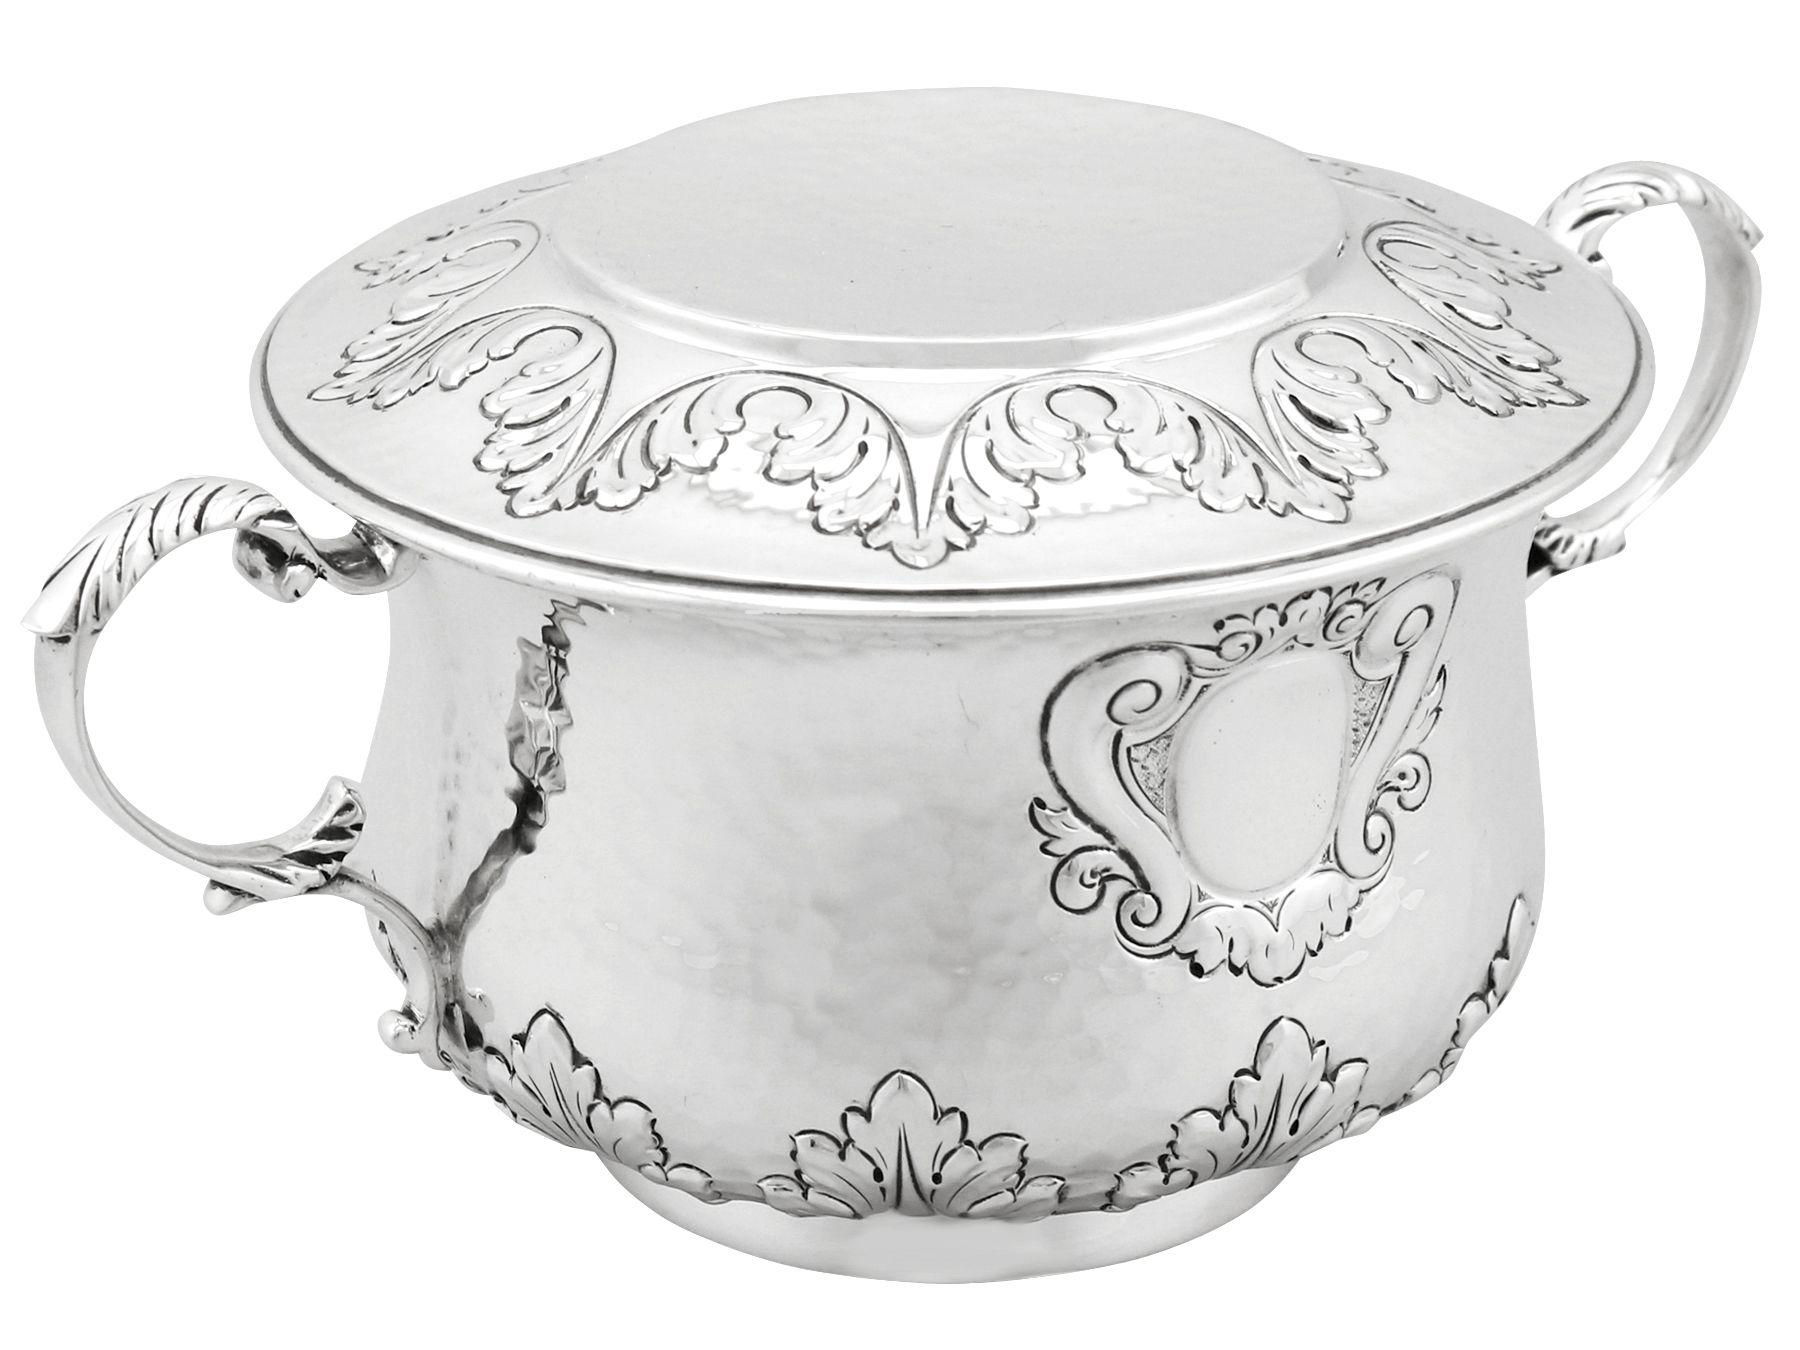 An exceptional, fine and impressive antique Edwardian English sterling silver porringer; an addition to our silver presentation collection

This exceptional antique Edwardian sterling silver porringer and cover has a plain baluster shaped form